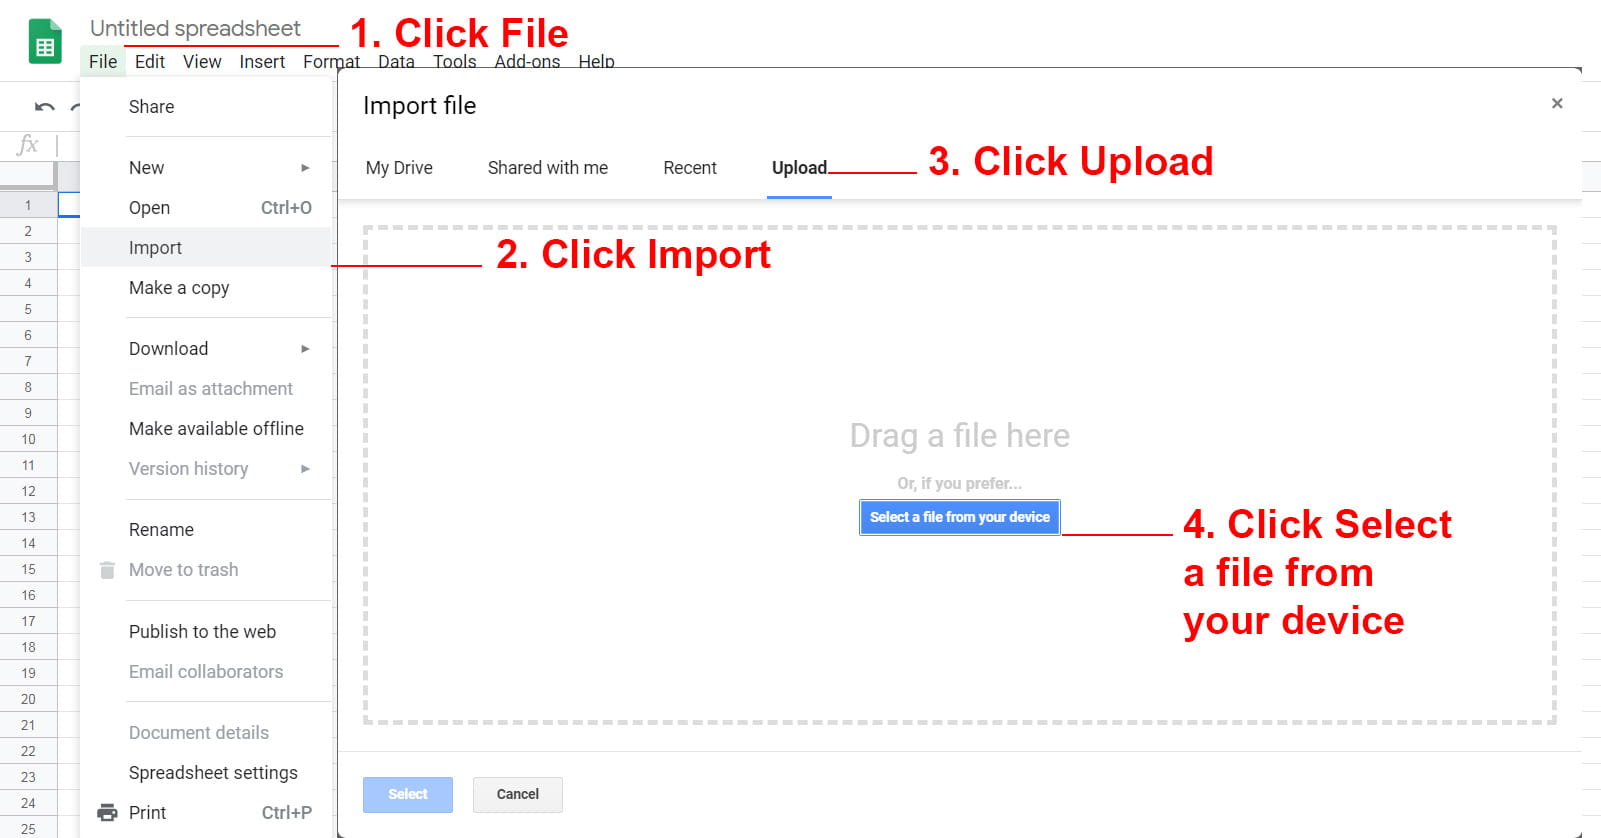 Google Sheets - Click File, Import, and Upload